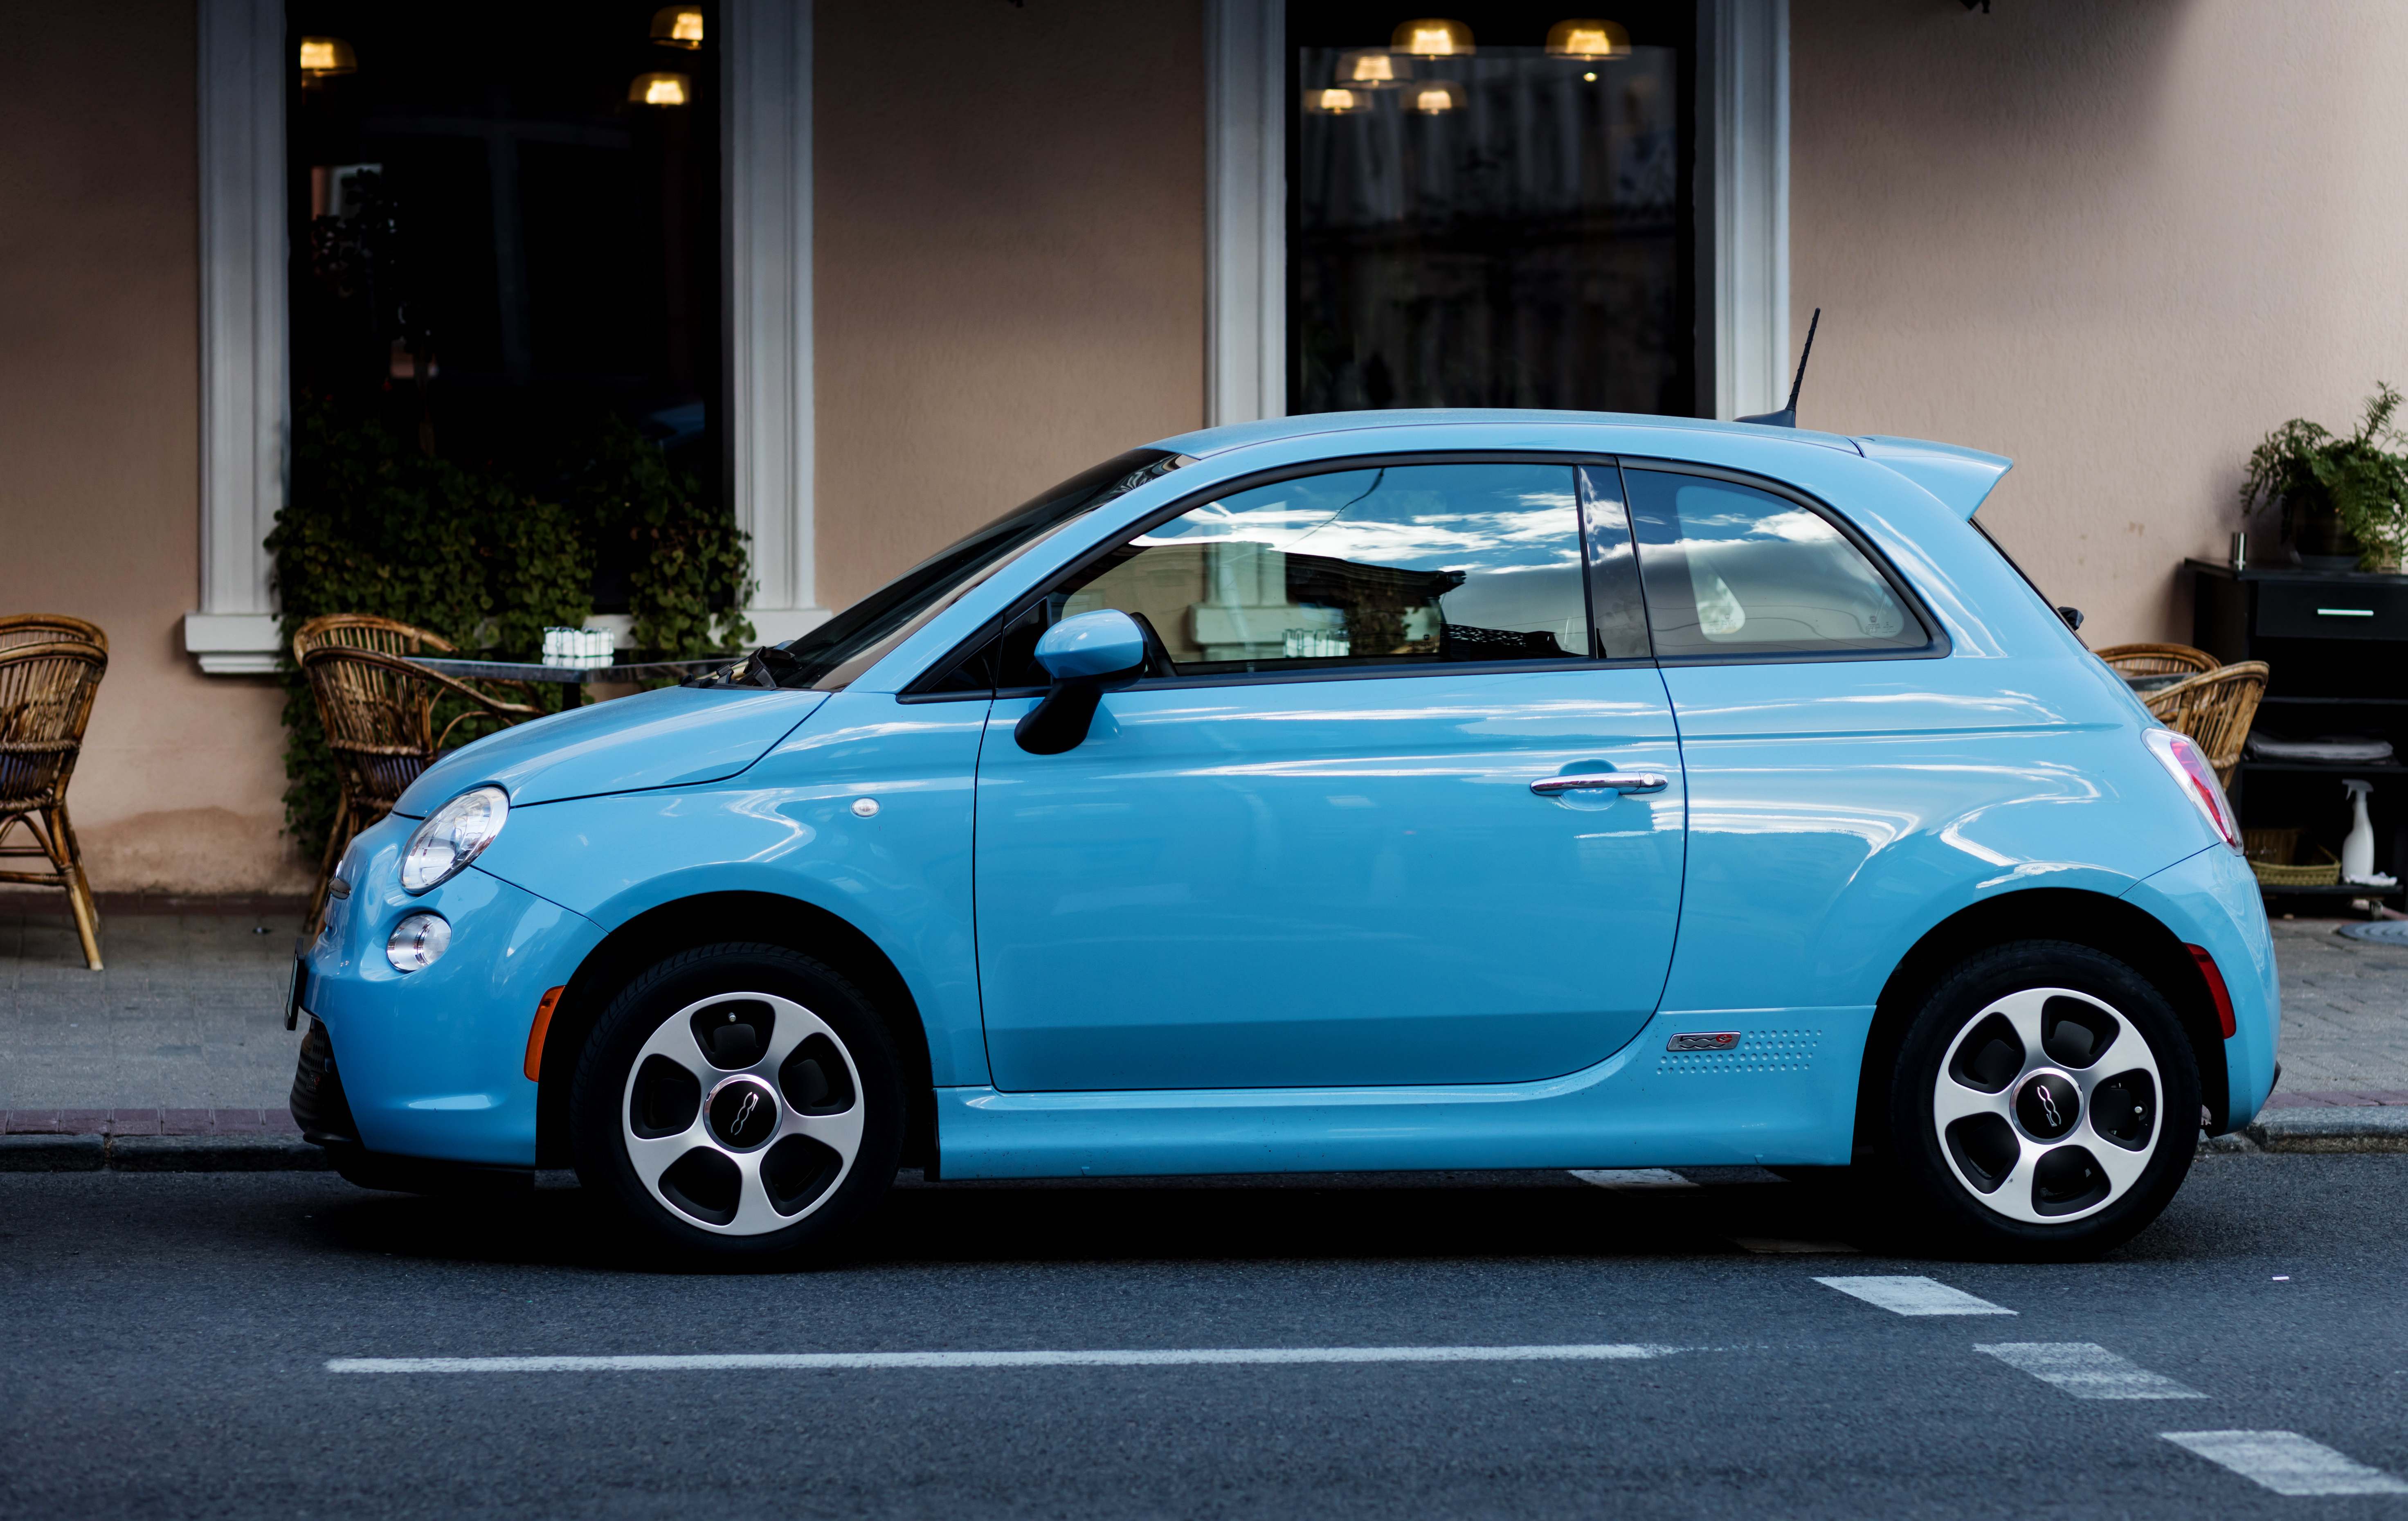 Image of a blue Fiat 500